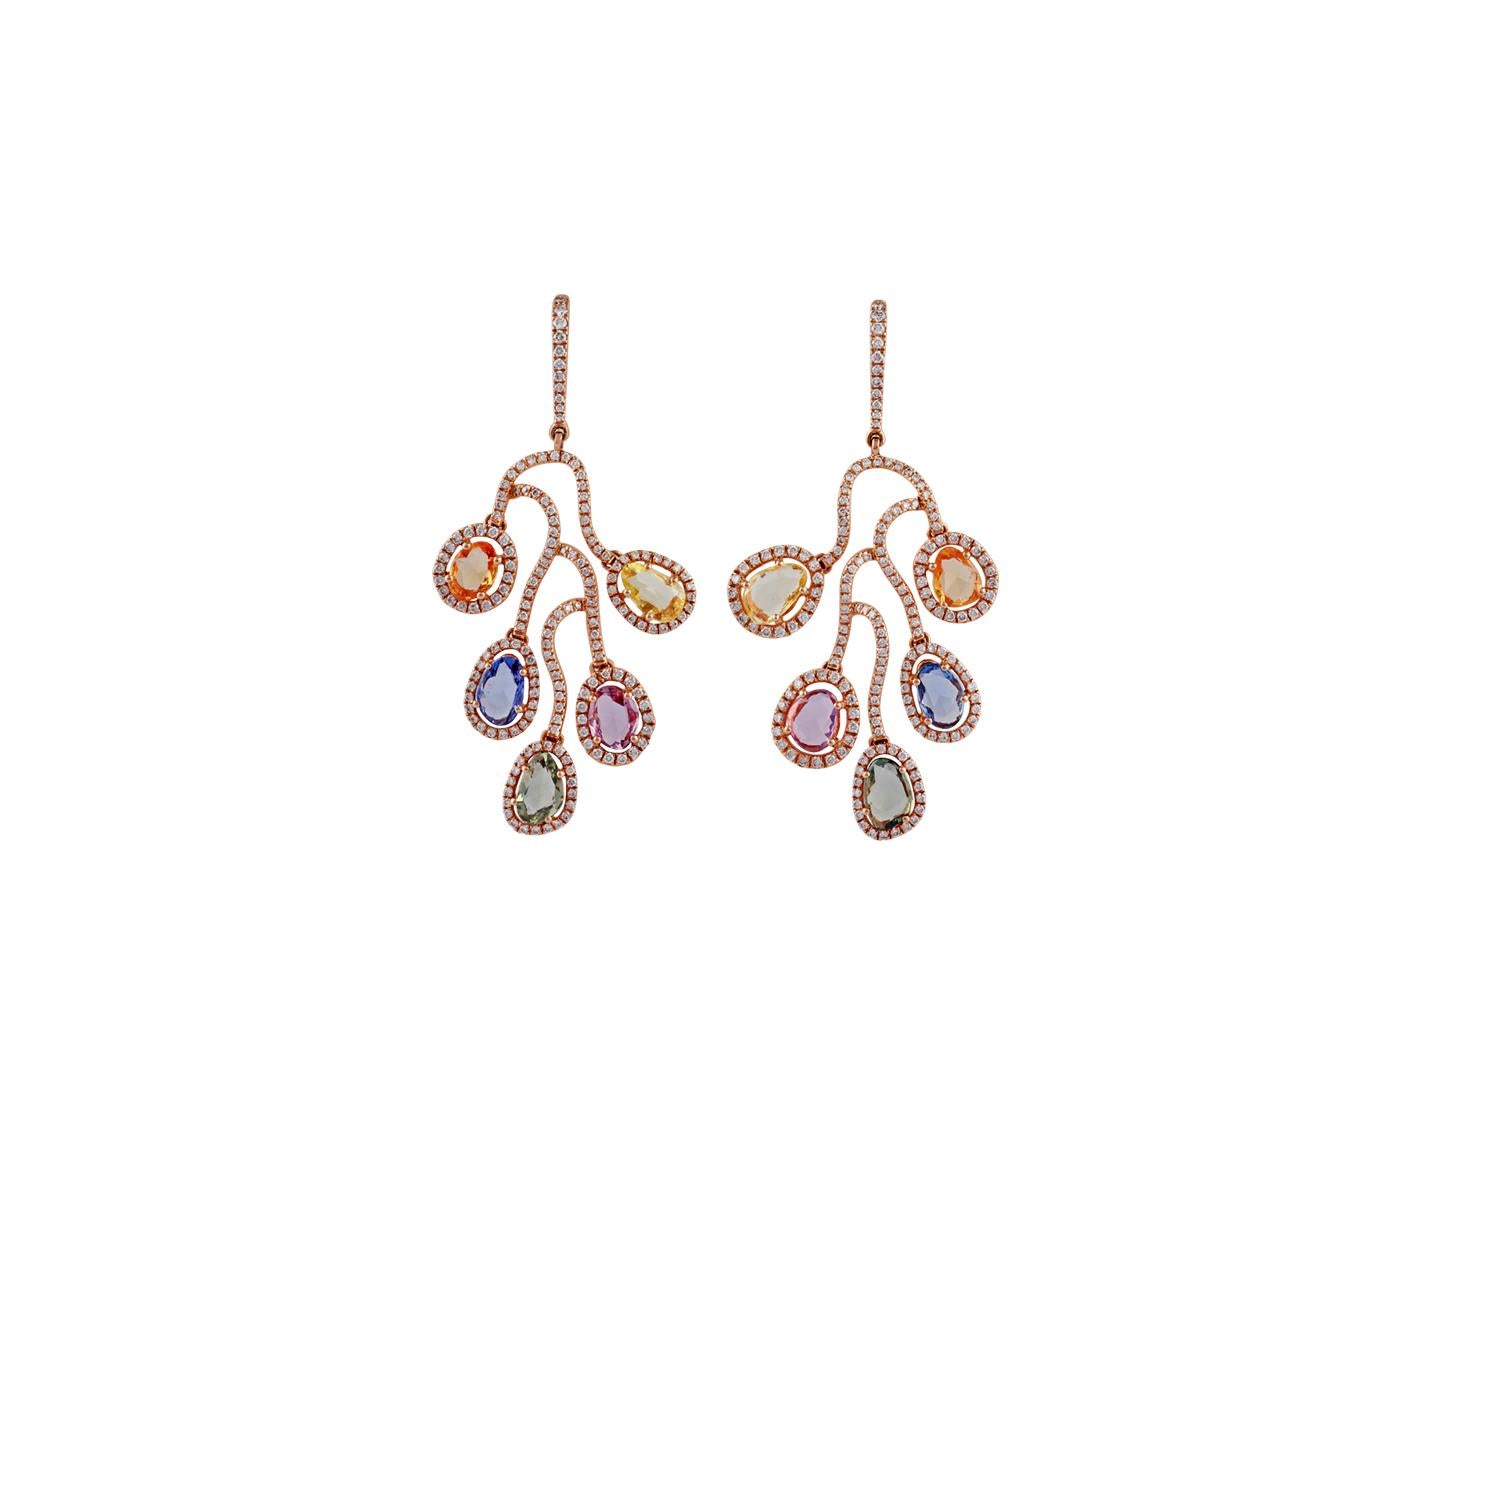 These are an elegant dangle earring pair studded in 18K rose gold features 10 pieces of rose cut multi color sapphires weight 6.62 carats, with 350 pieces of round shaped diamonds weight 1.89 carats, these earrings are entirely made in 18K rose gold